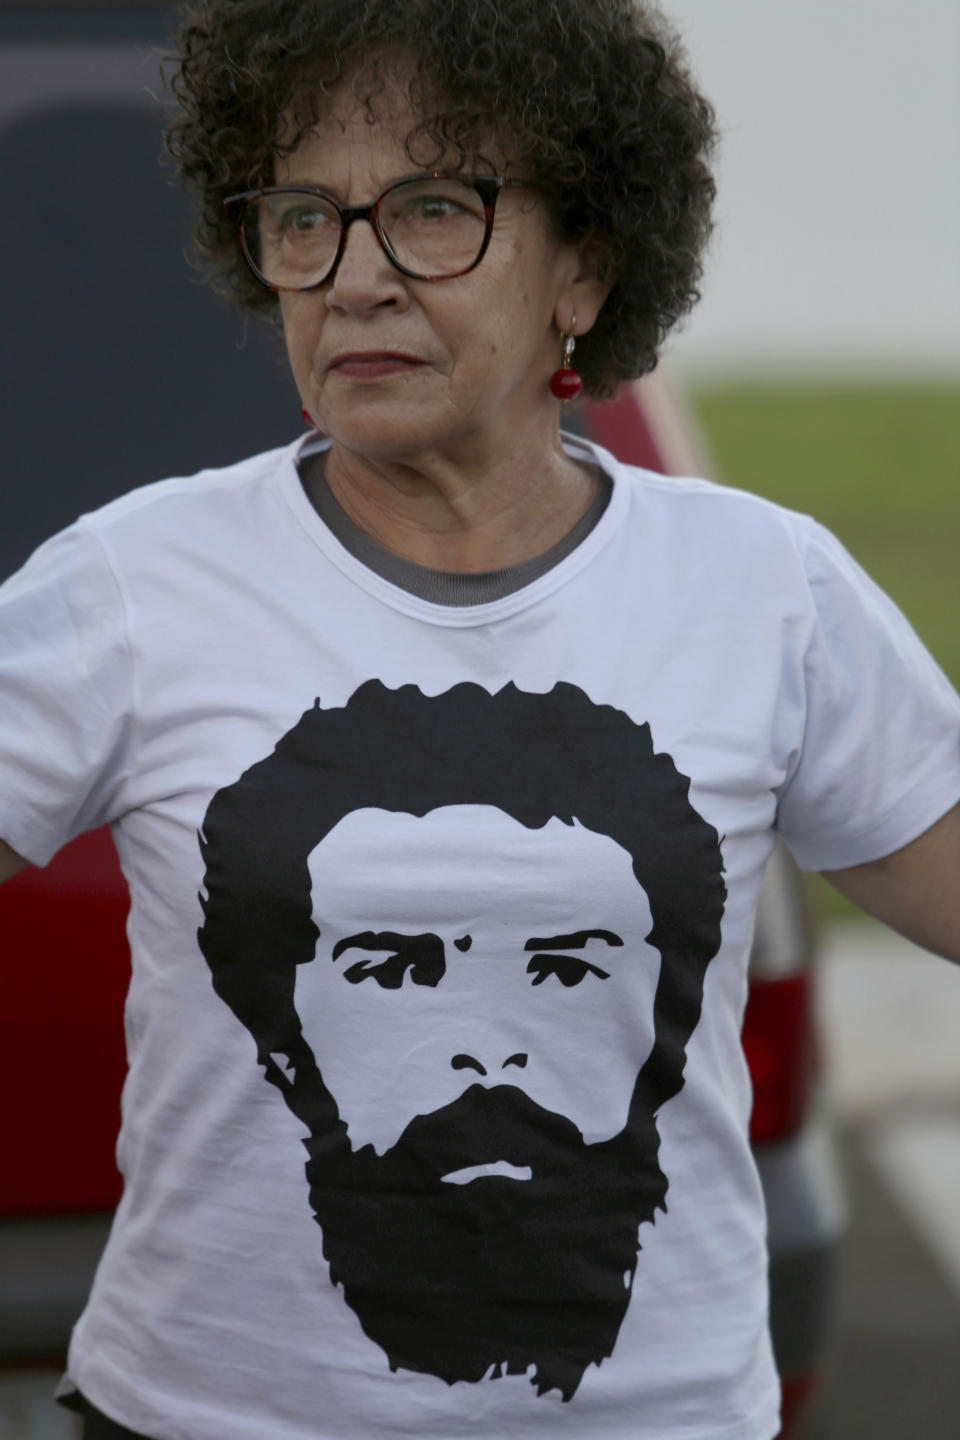 A supporter of Brazil's Former President Luiz Inacio Lula da Silva, sports a T-shirt with da Silva's image on it during a protest in front of the Superior Electoral Tribunal, as the trial against the candidacy of the jailed former president continues, in Brasilia, Brazil, Friday, Aug. 31, 2018. Brazil's general elections will be held on October 7. (AP Photo/Eraldo Peres)